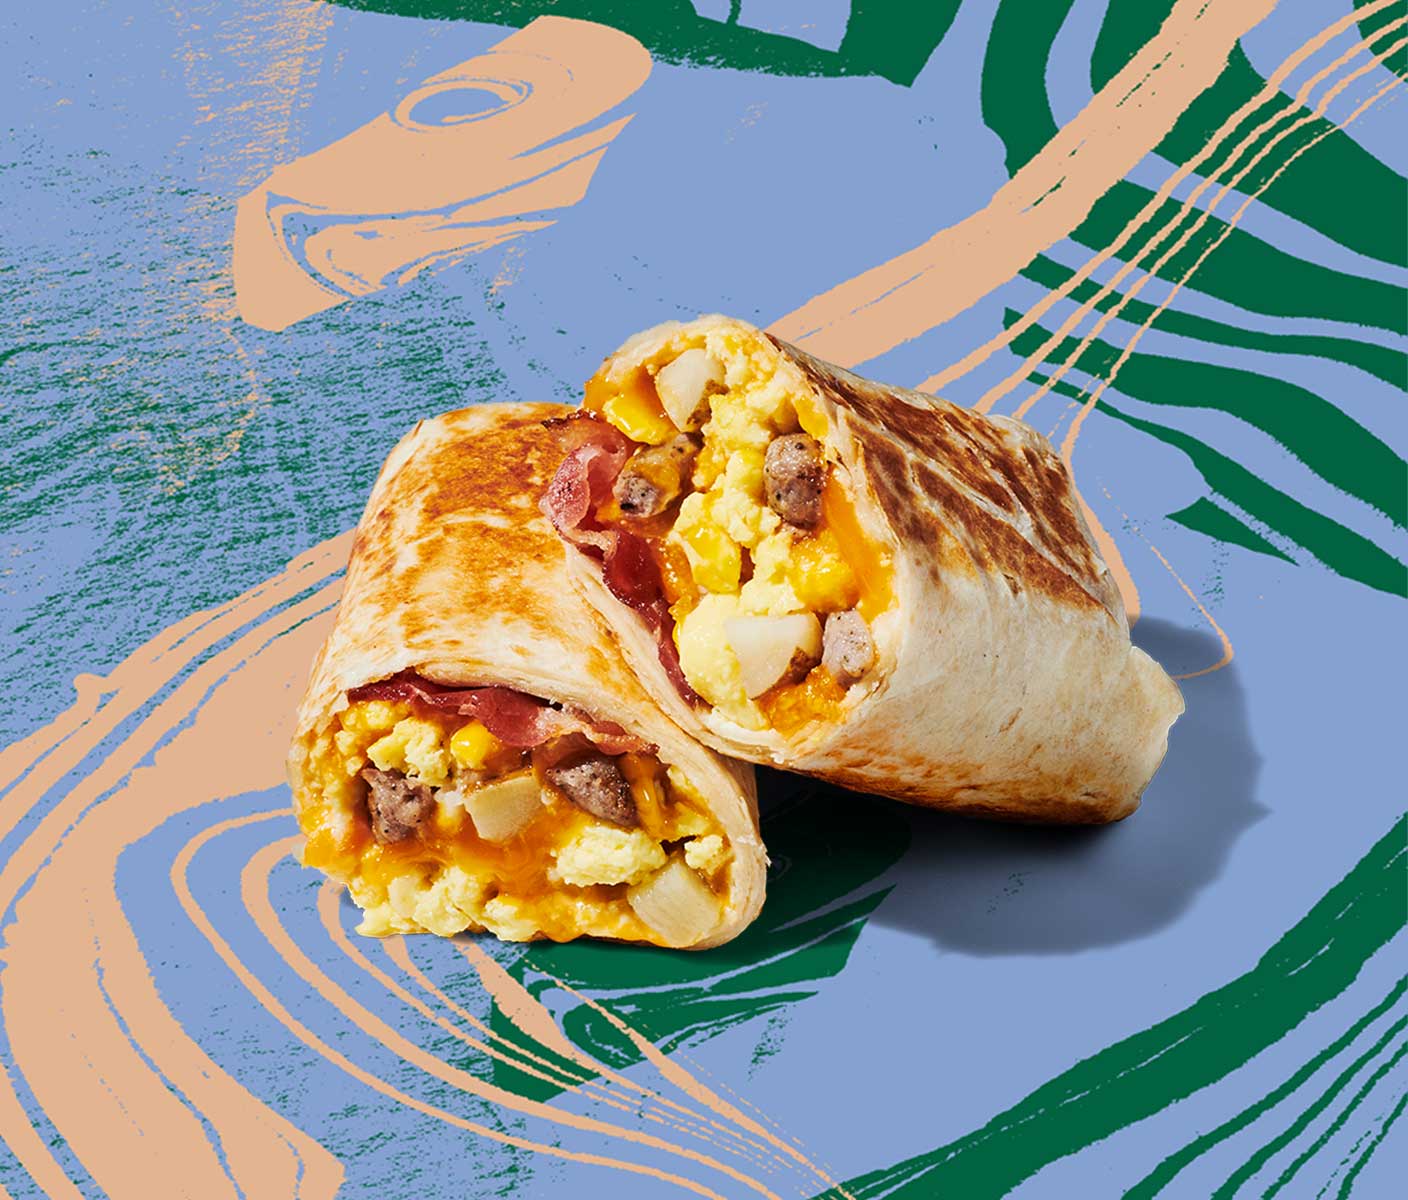 A breakfast wrap cut in half and stacked on top of itself, displaying mix of ingredients inside.